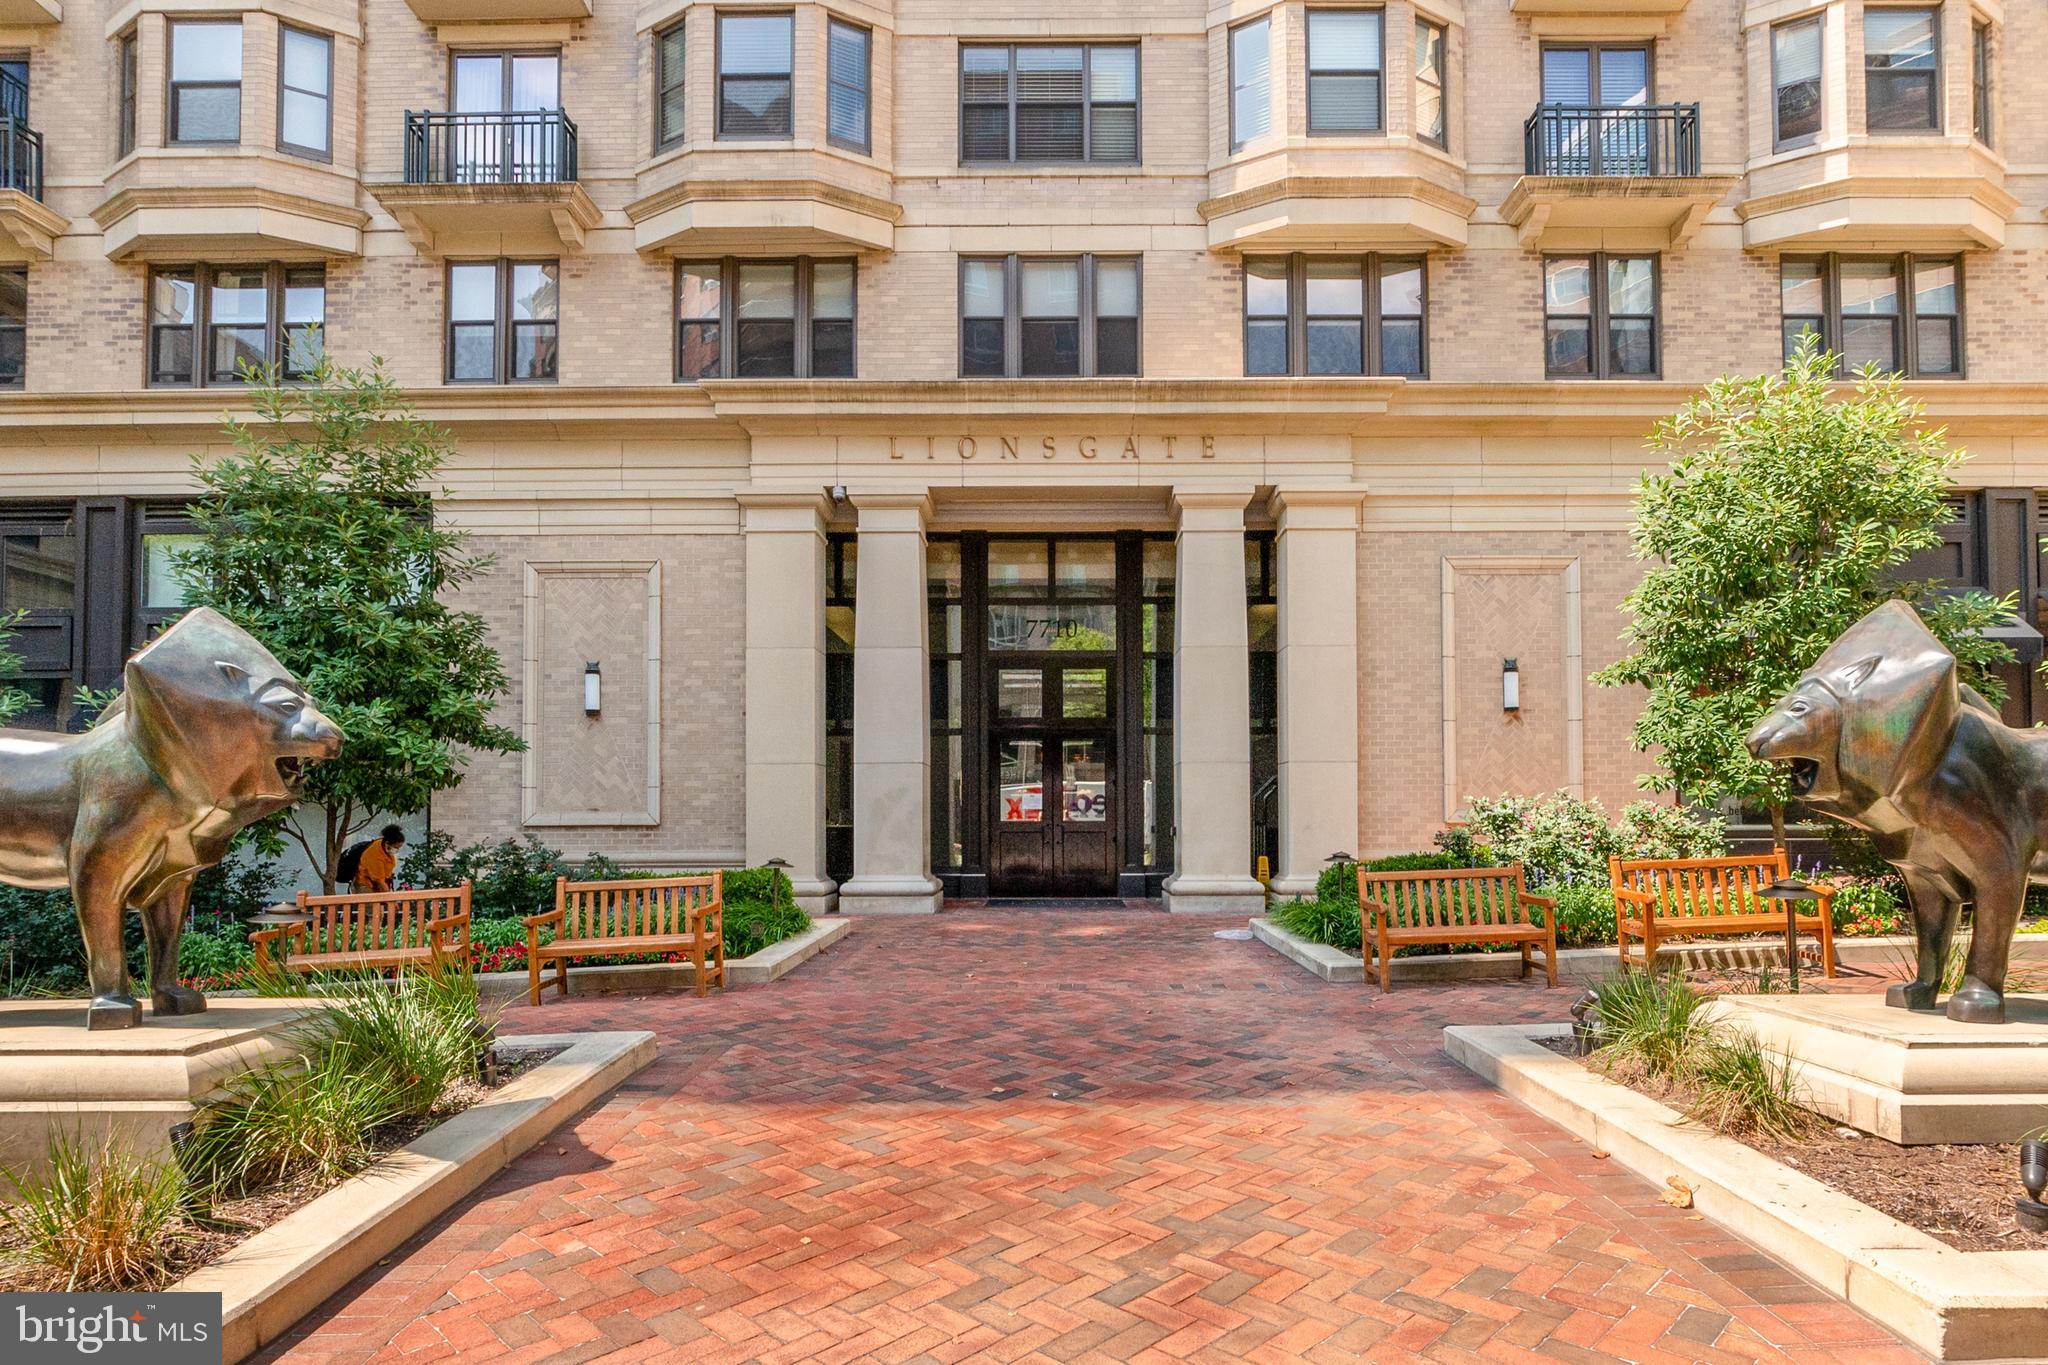 View condos for sale in Lionsgate, Bethesda, MD